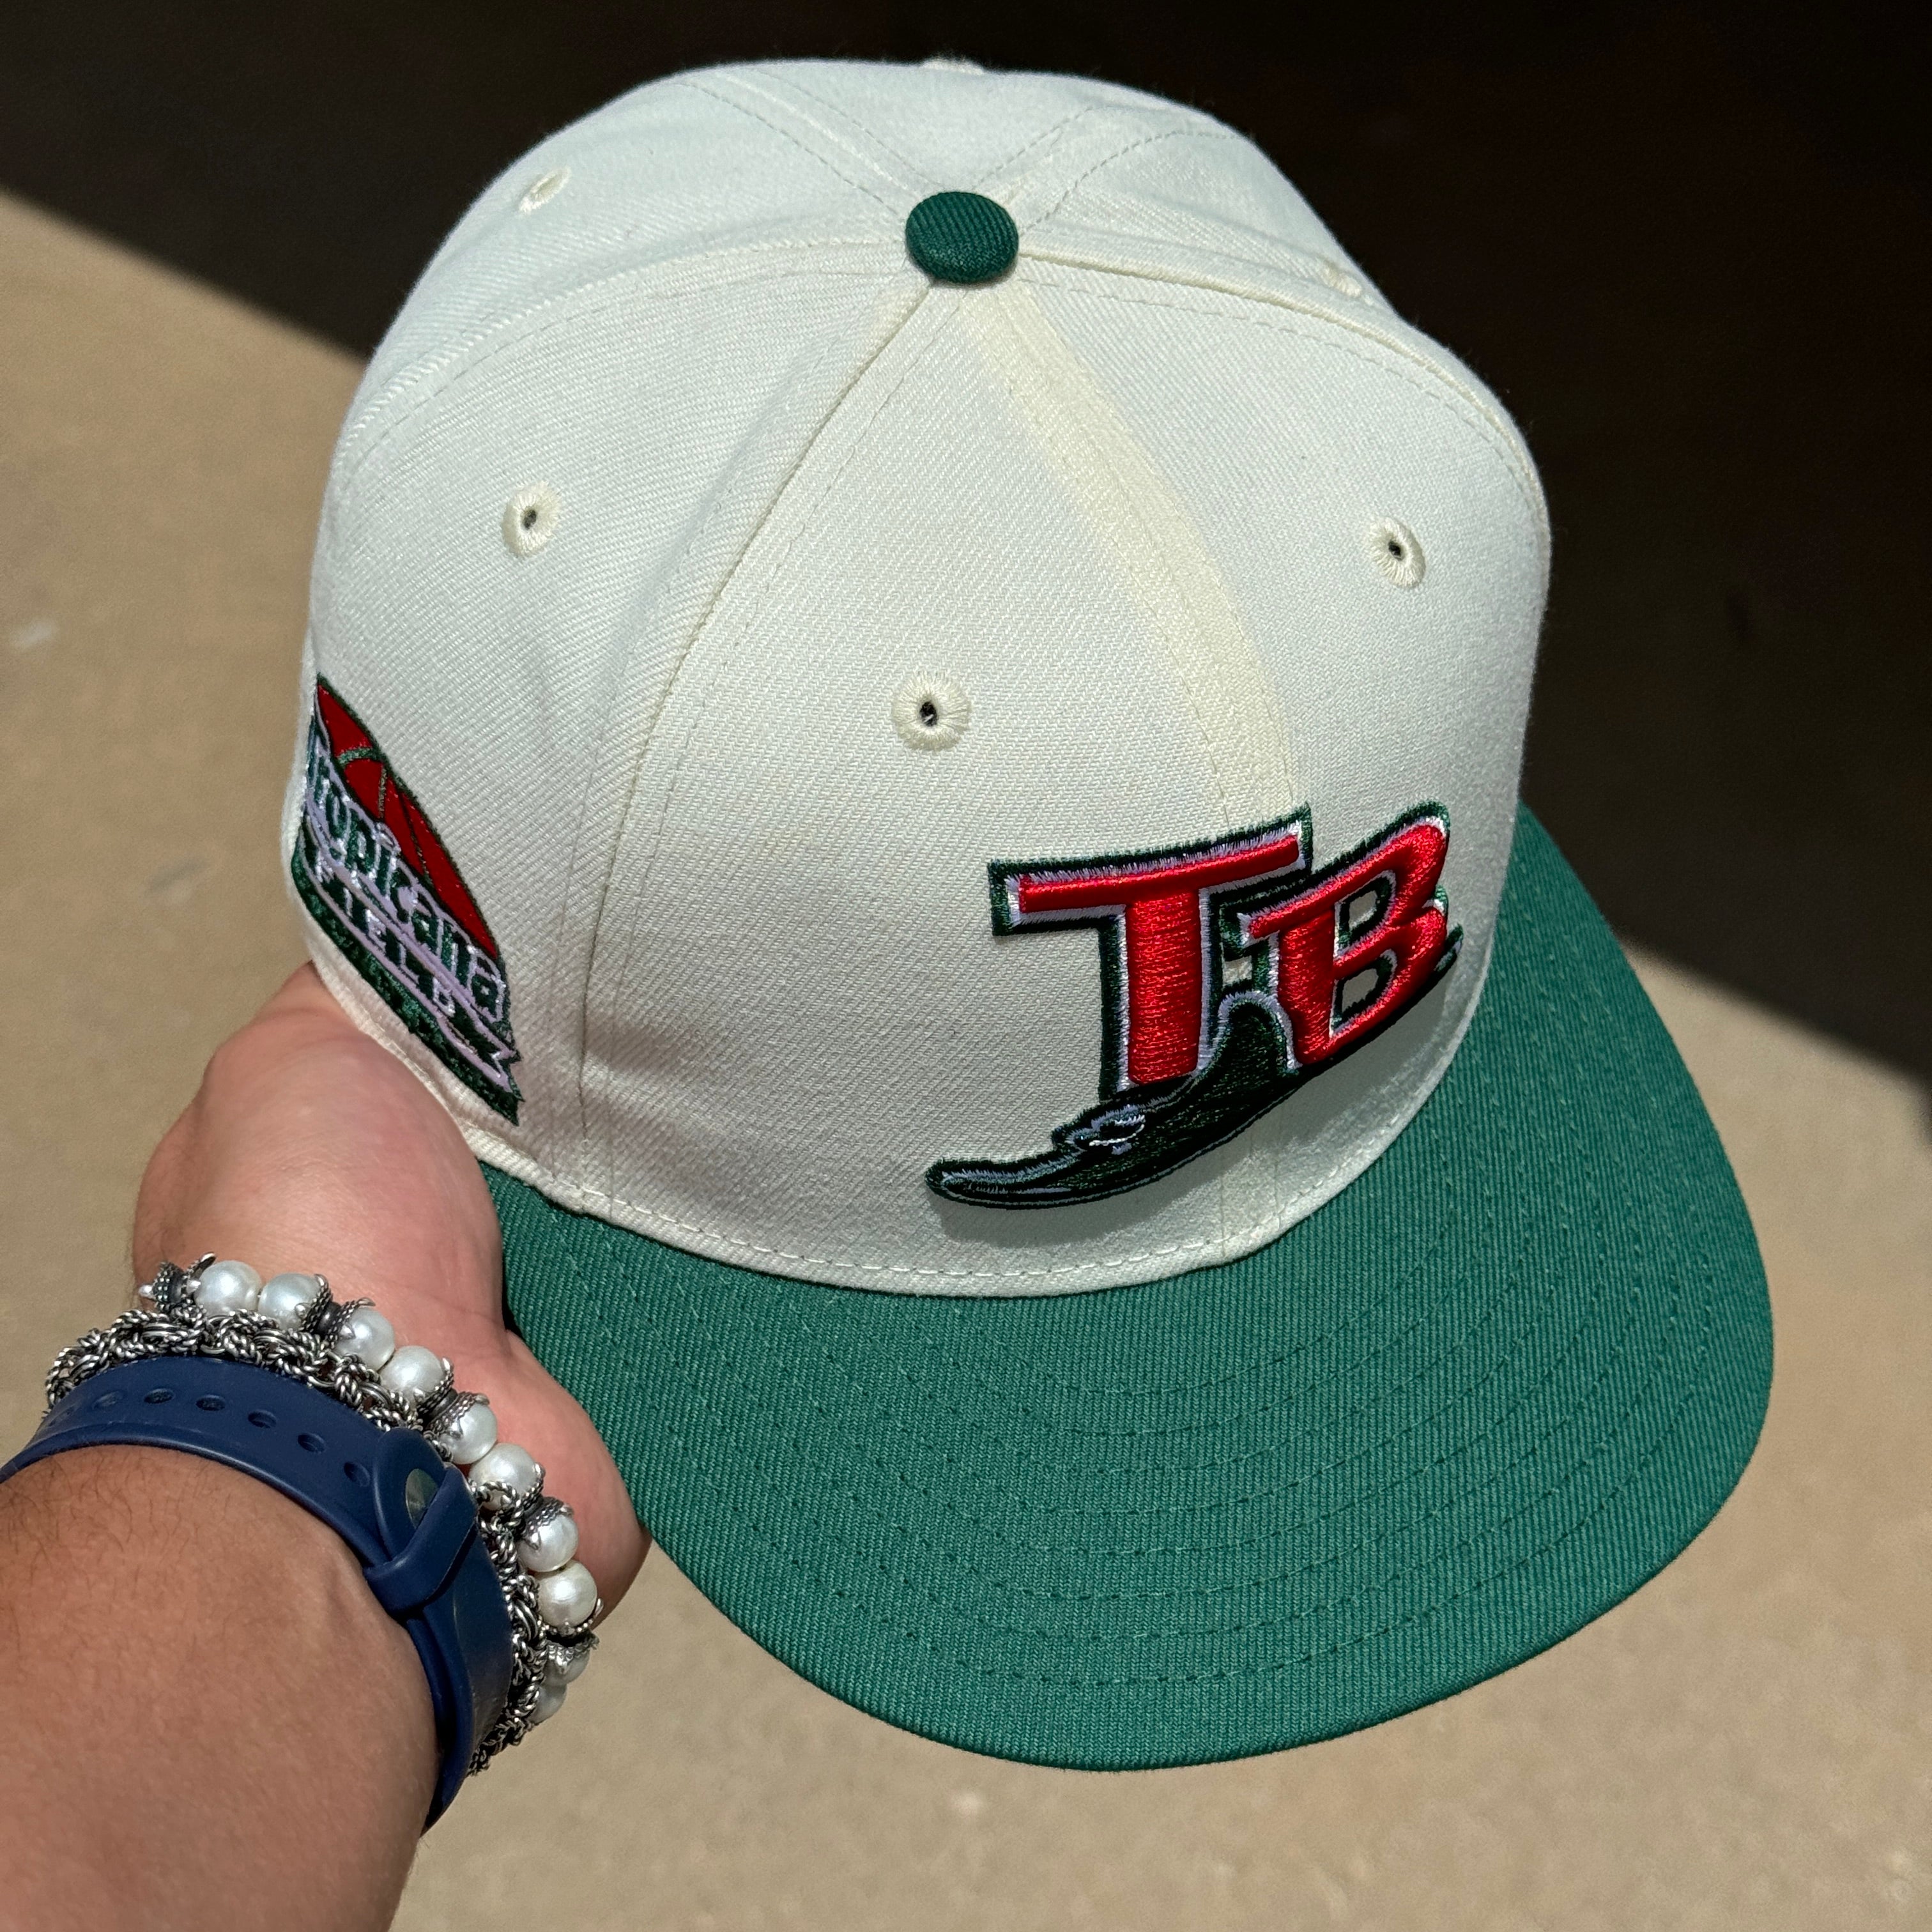 USED 1/8 Chrome Tampa Bay Devil Rays Tropicana Field 59fifty New Era Fitted Hat Cap